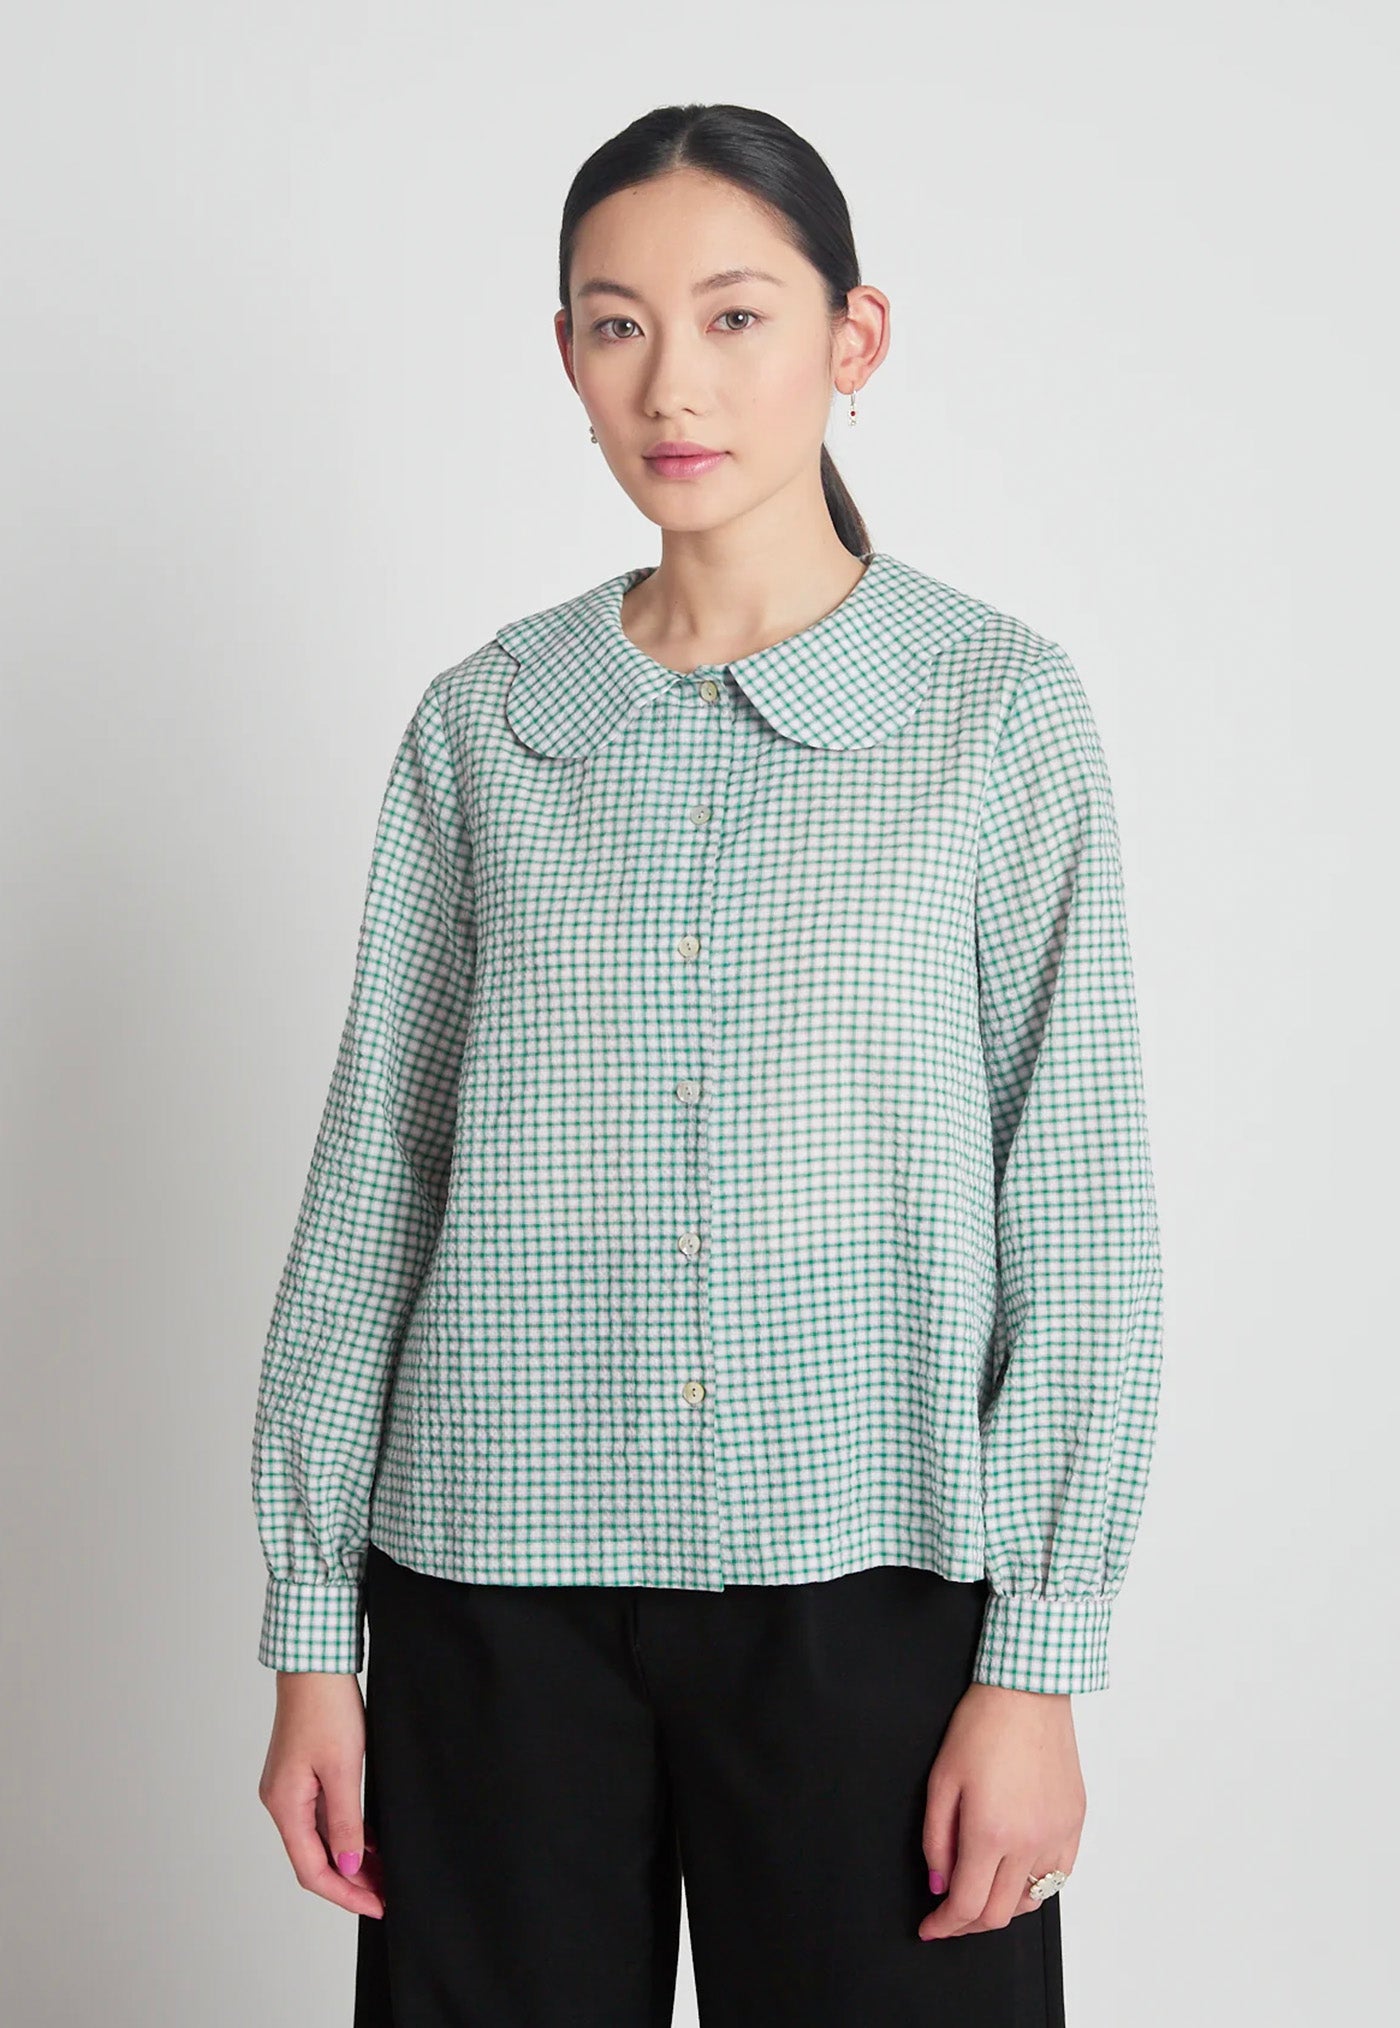 Lovecraft Shirt - Green Gingham sold by Angel Divine